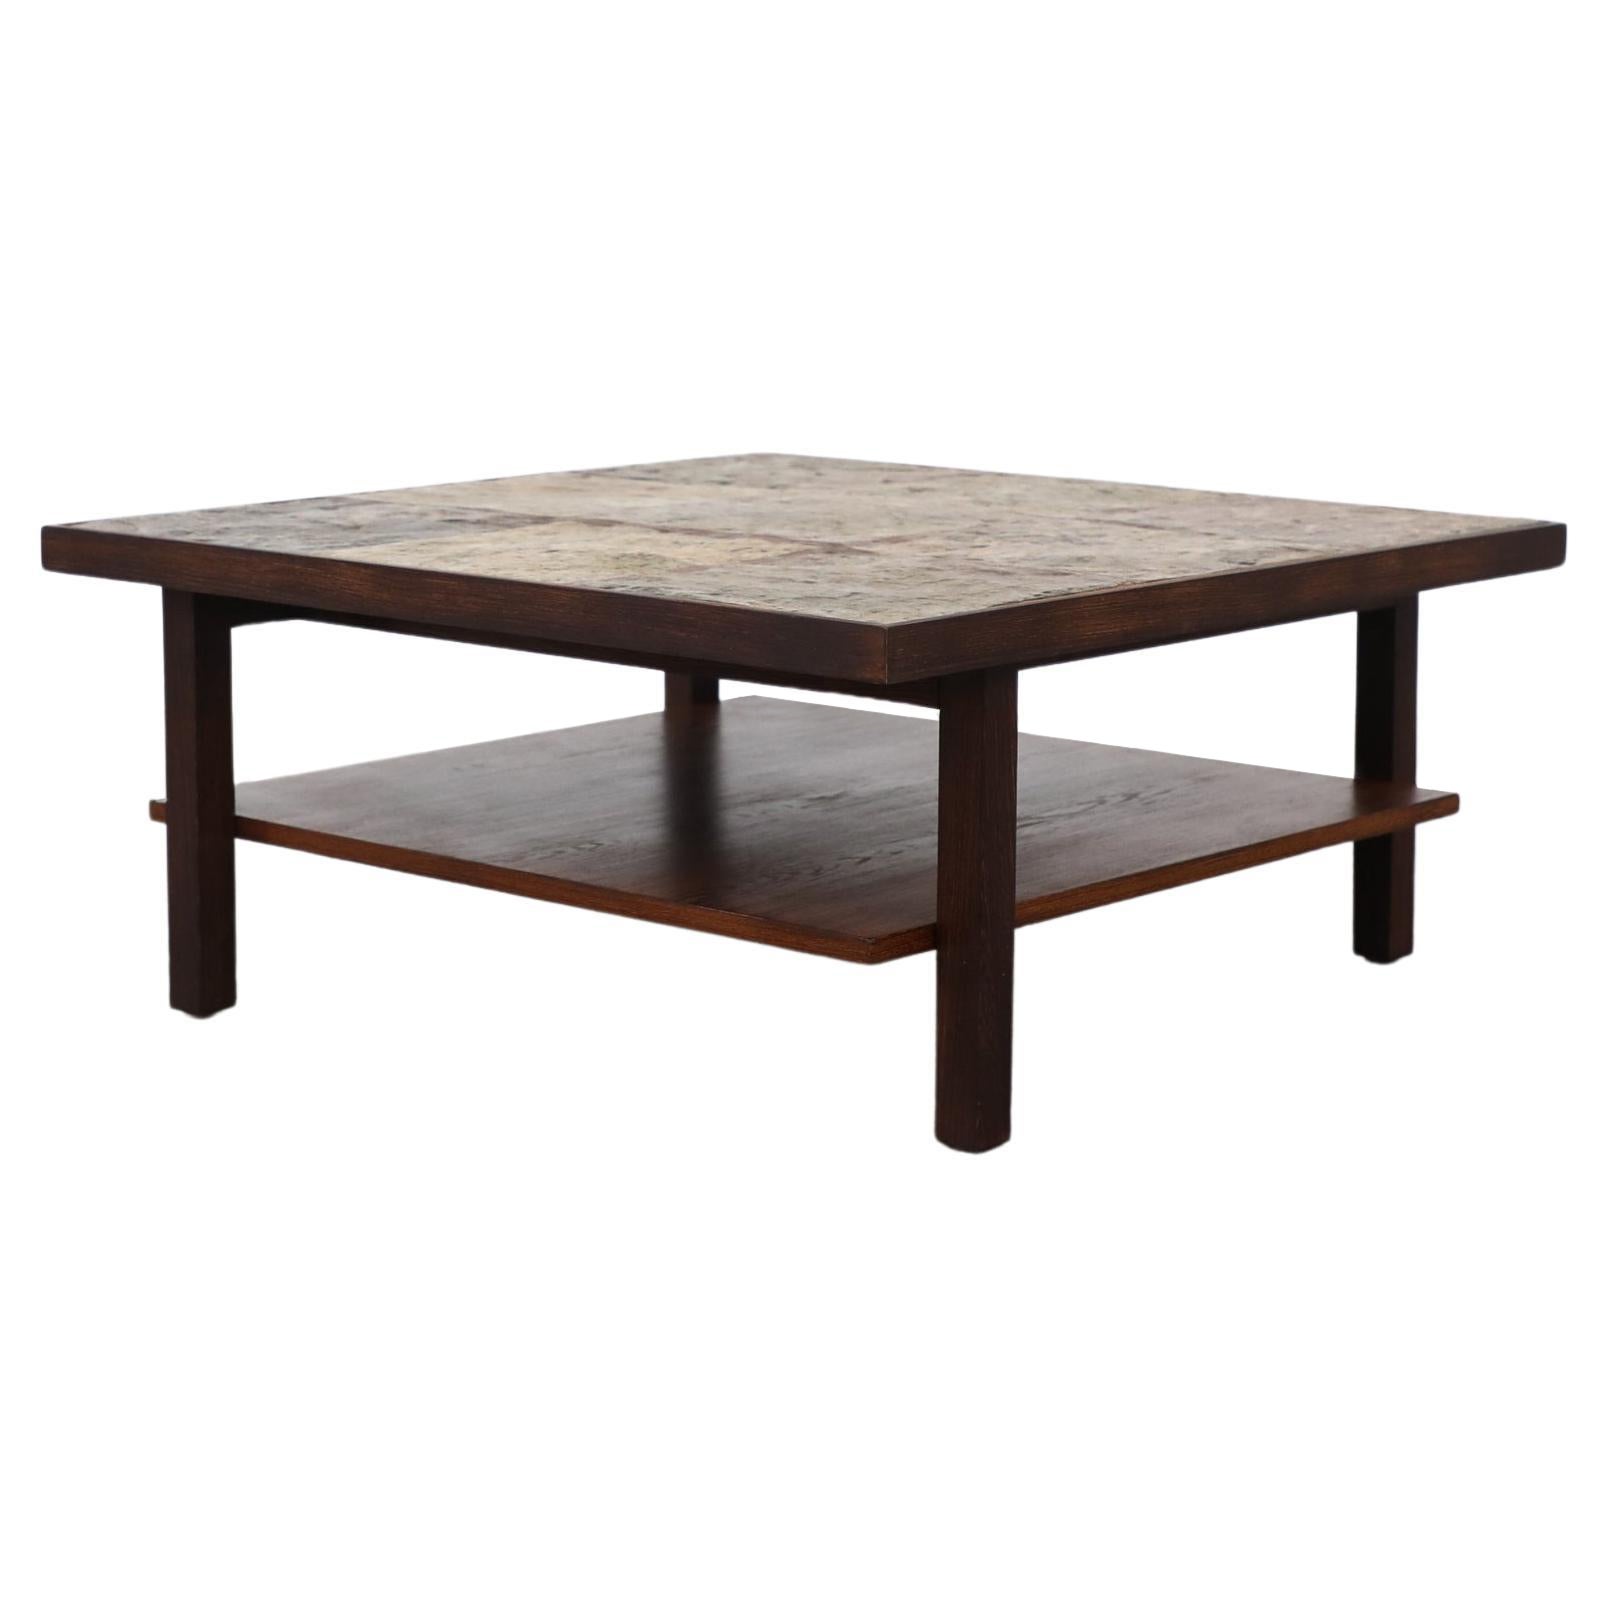 Mid-Century Modern Brutalist Wood Framed Stone Topped Coffee Table with Shelf For Sale